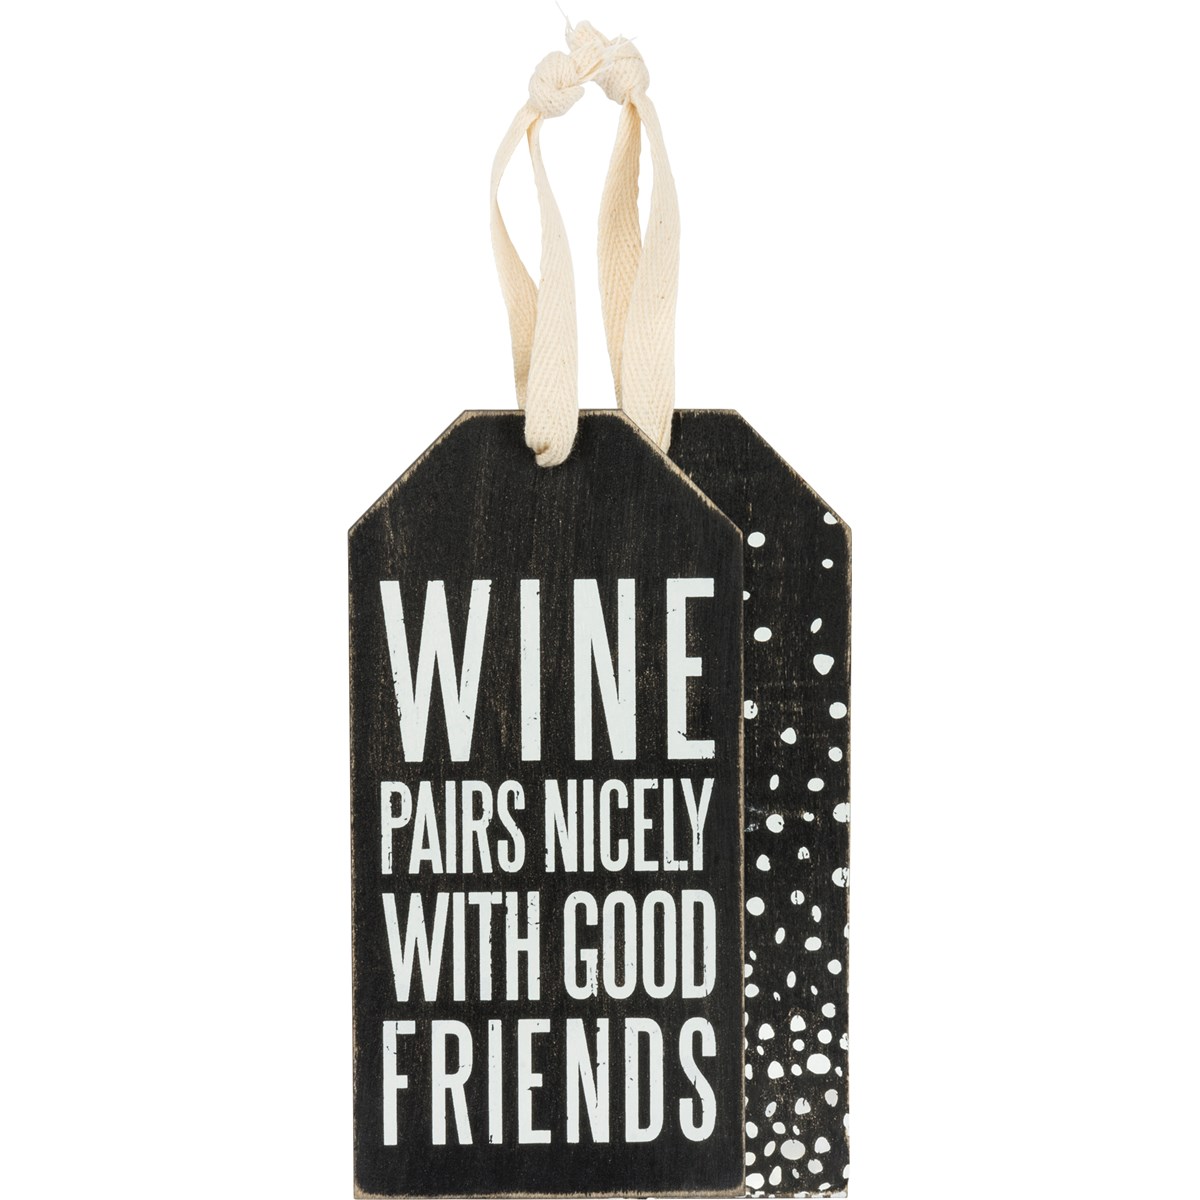 “Pairs Nicely” Bottle Tag